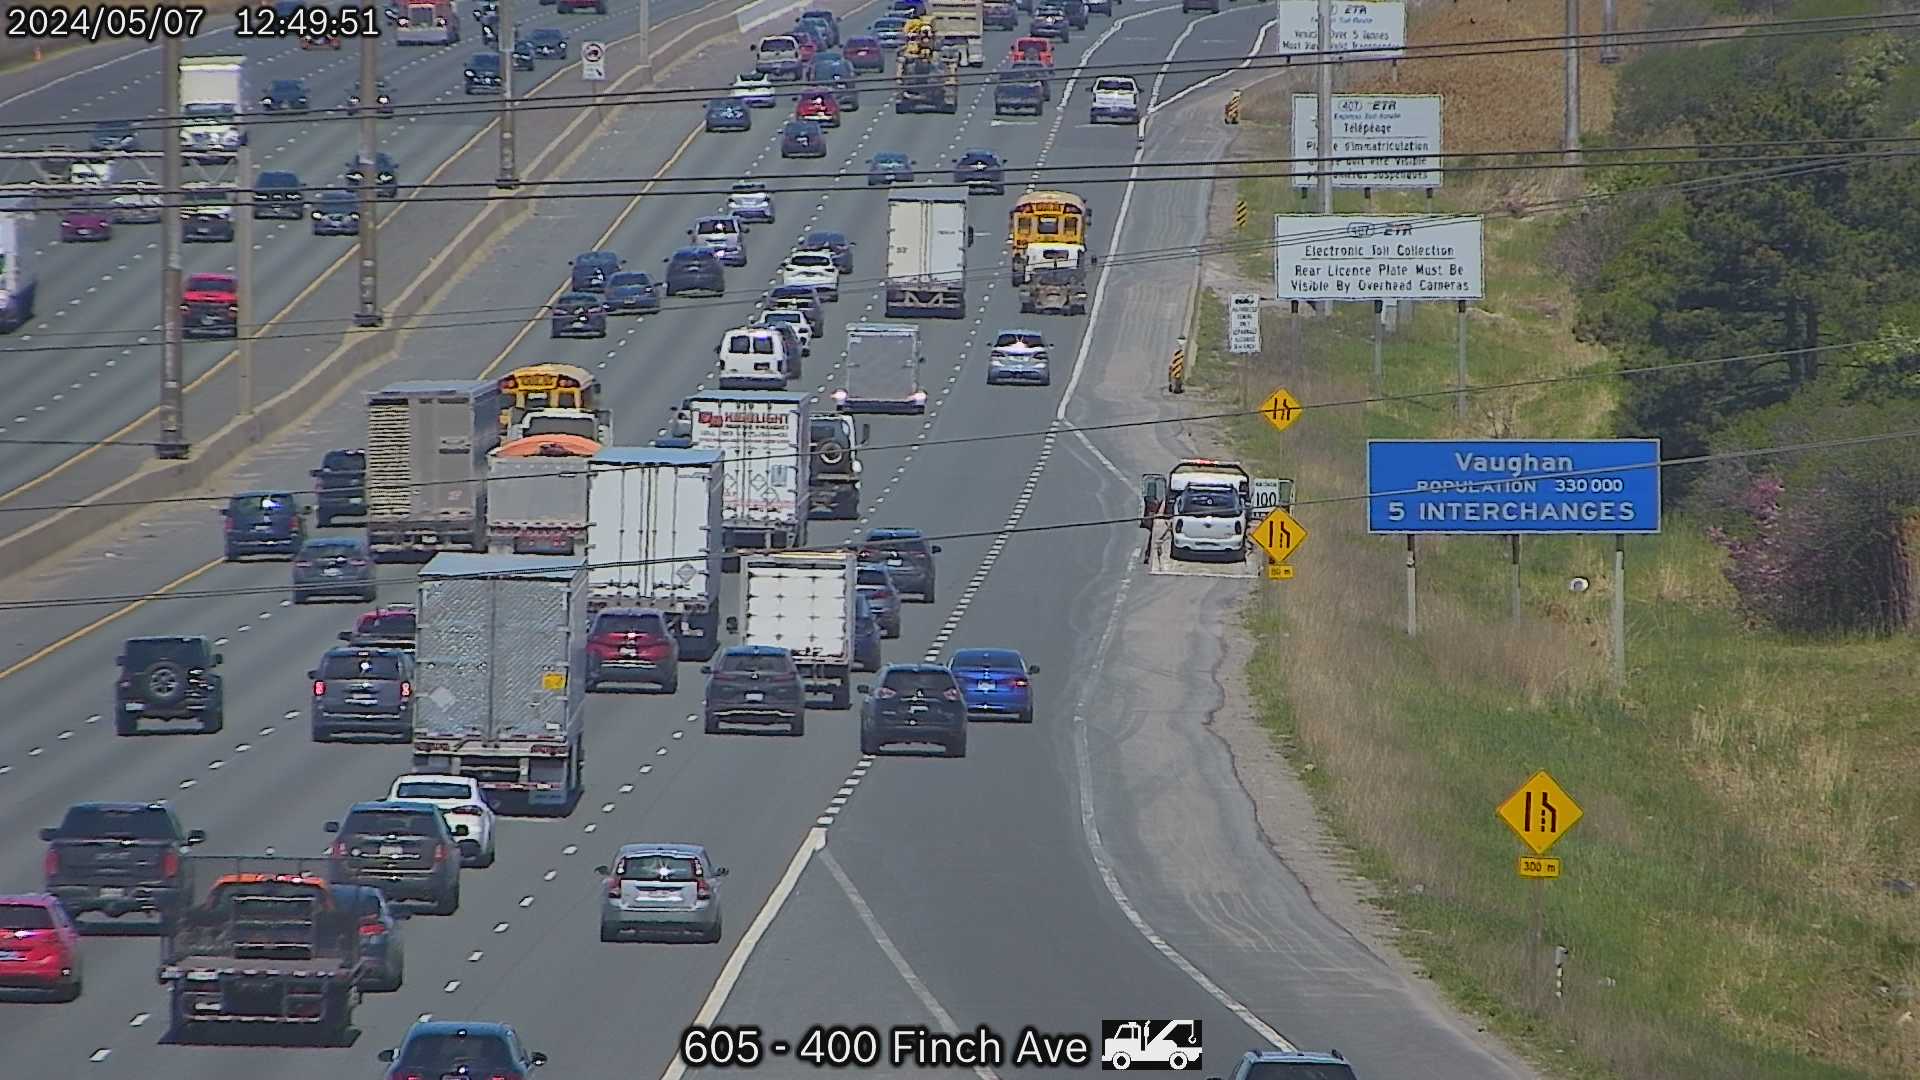 Traffic Camera of Highway 400 at Finch Ave